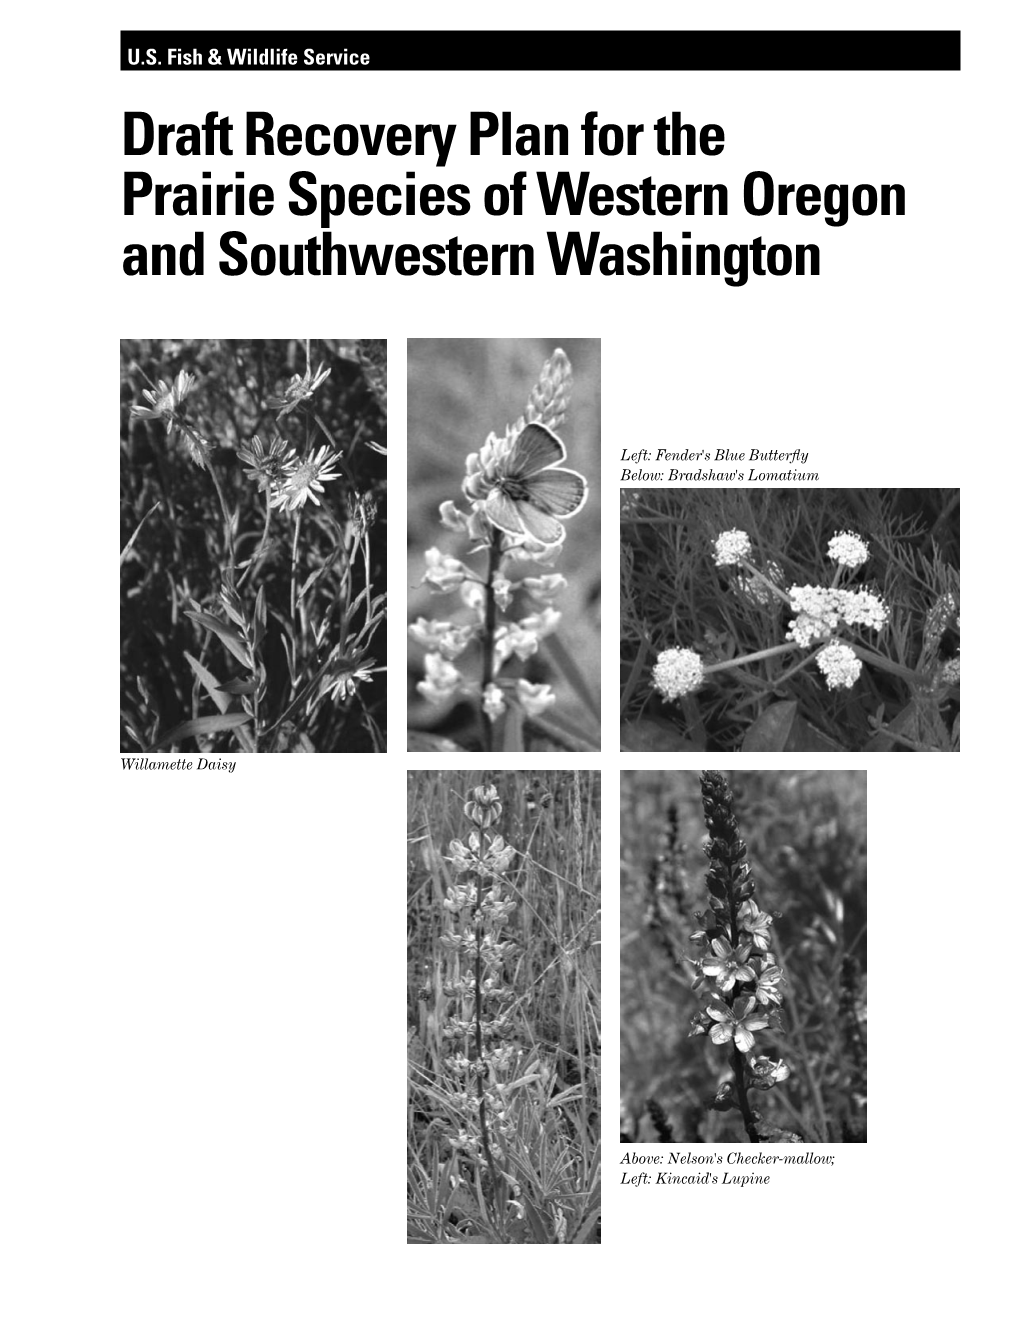 Draft Recovery Plan for the Prairie Species of Western Oregon and Southwestern Washington